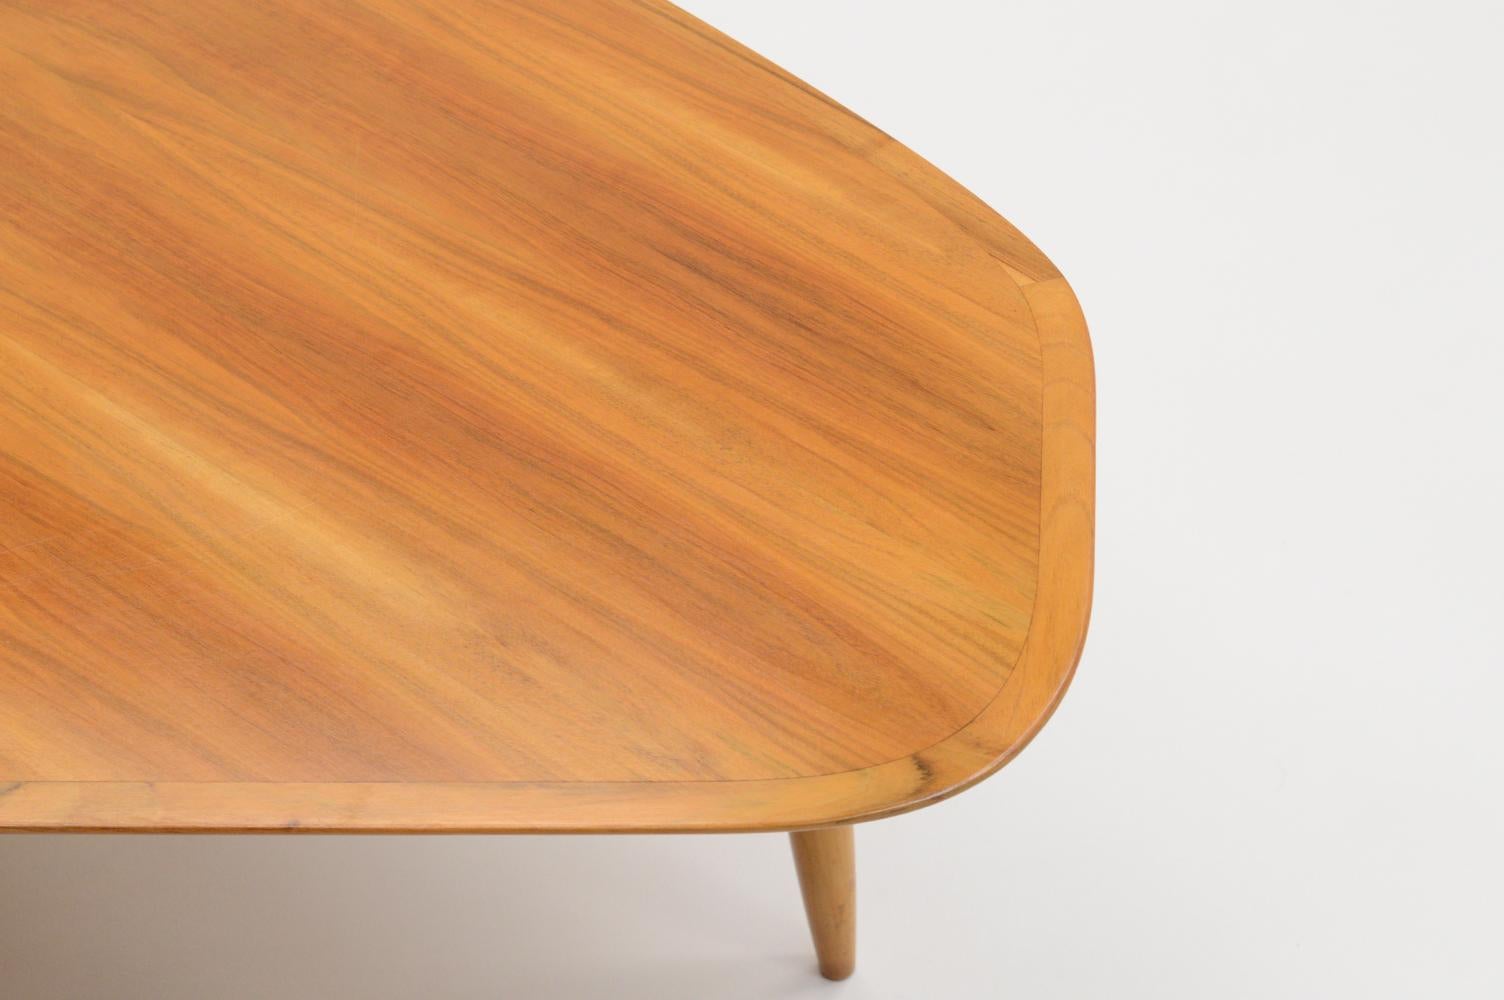 Teak Large coffee table by Svante Skogh for Laauser, 1960s Germany.  For Sale